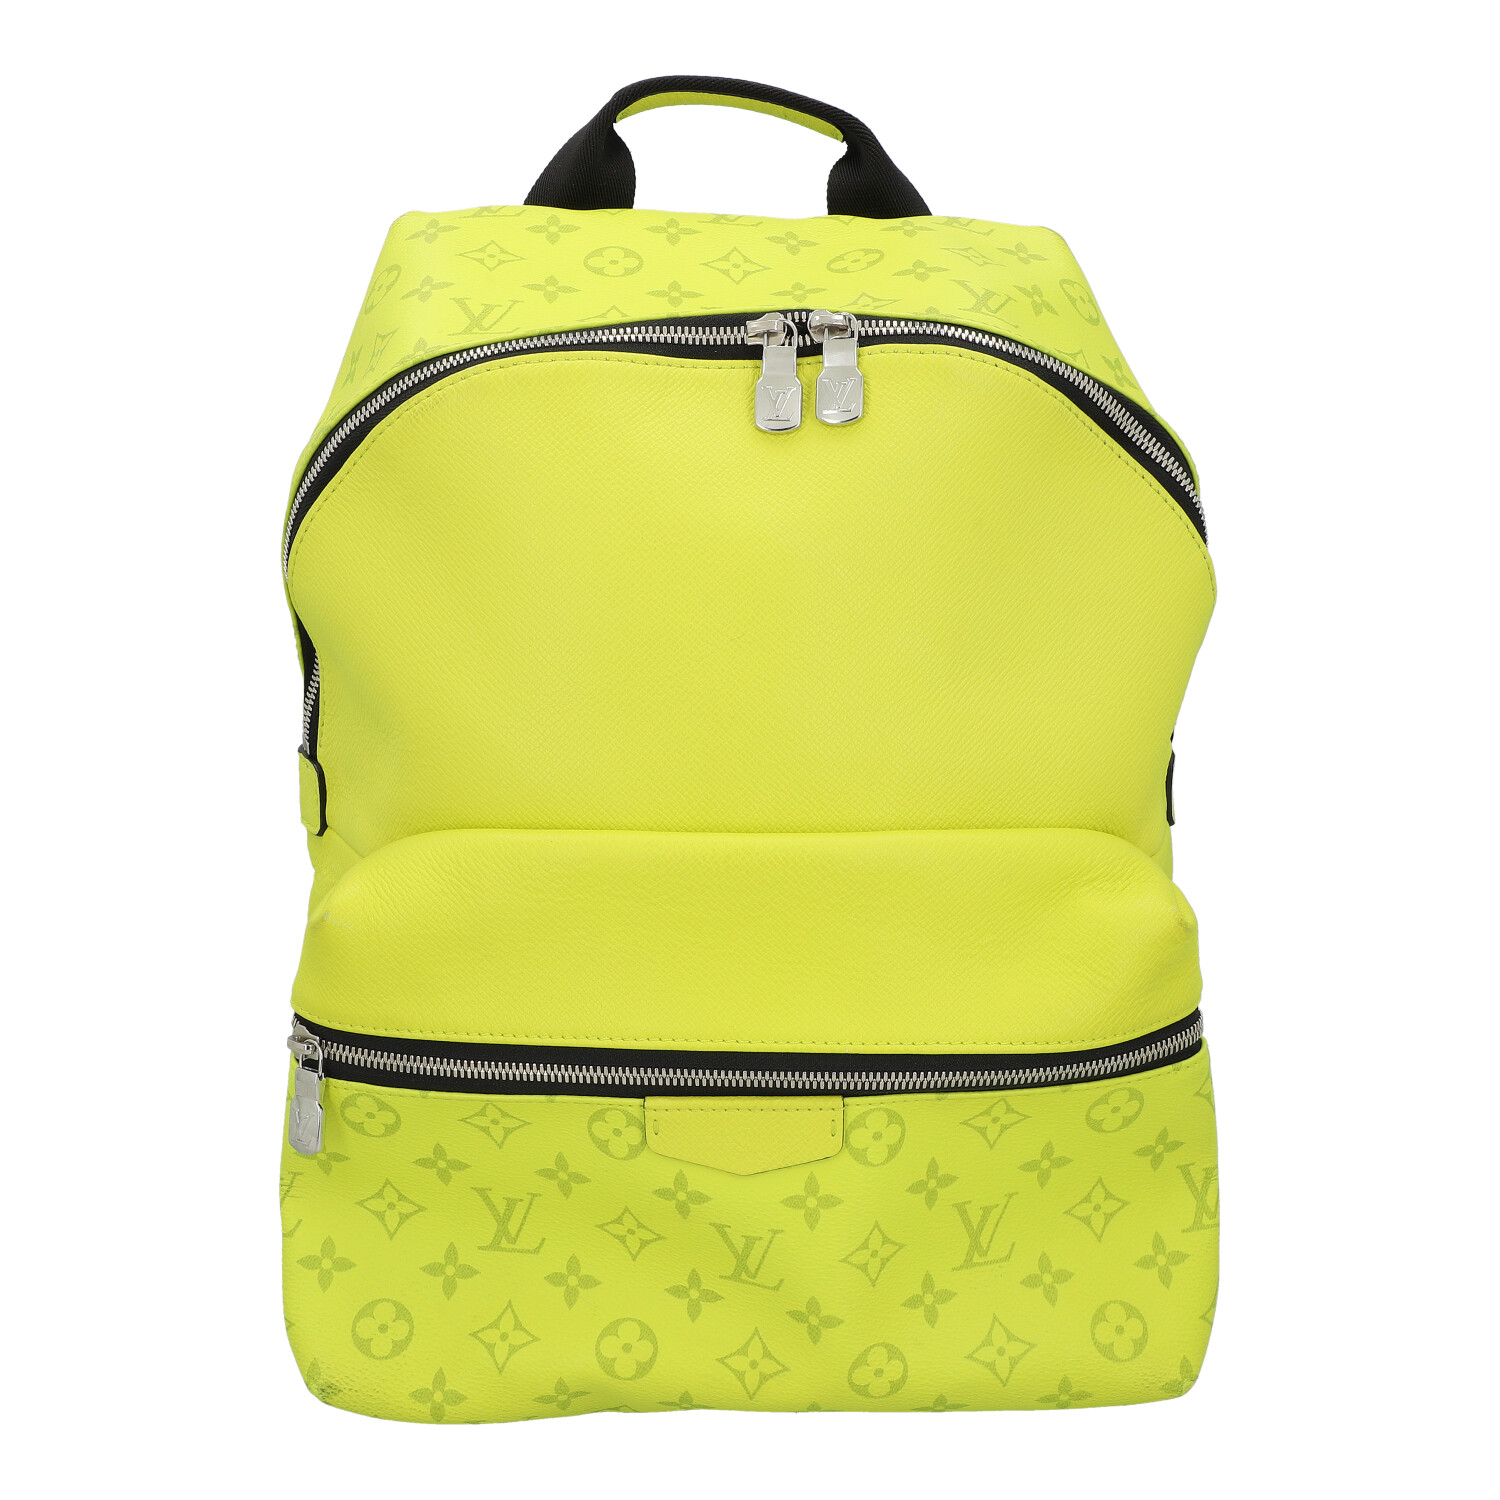 EPPLI | LOUIS VUITTON Backpack 'DISCOVERY'. | purchase online